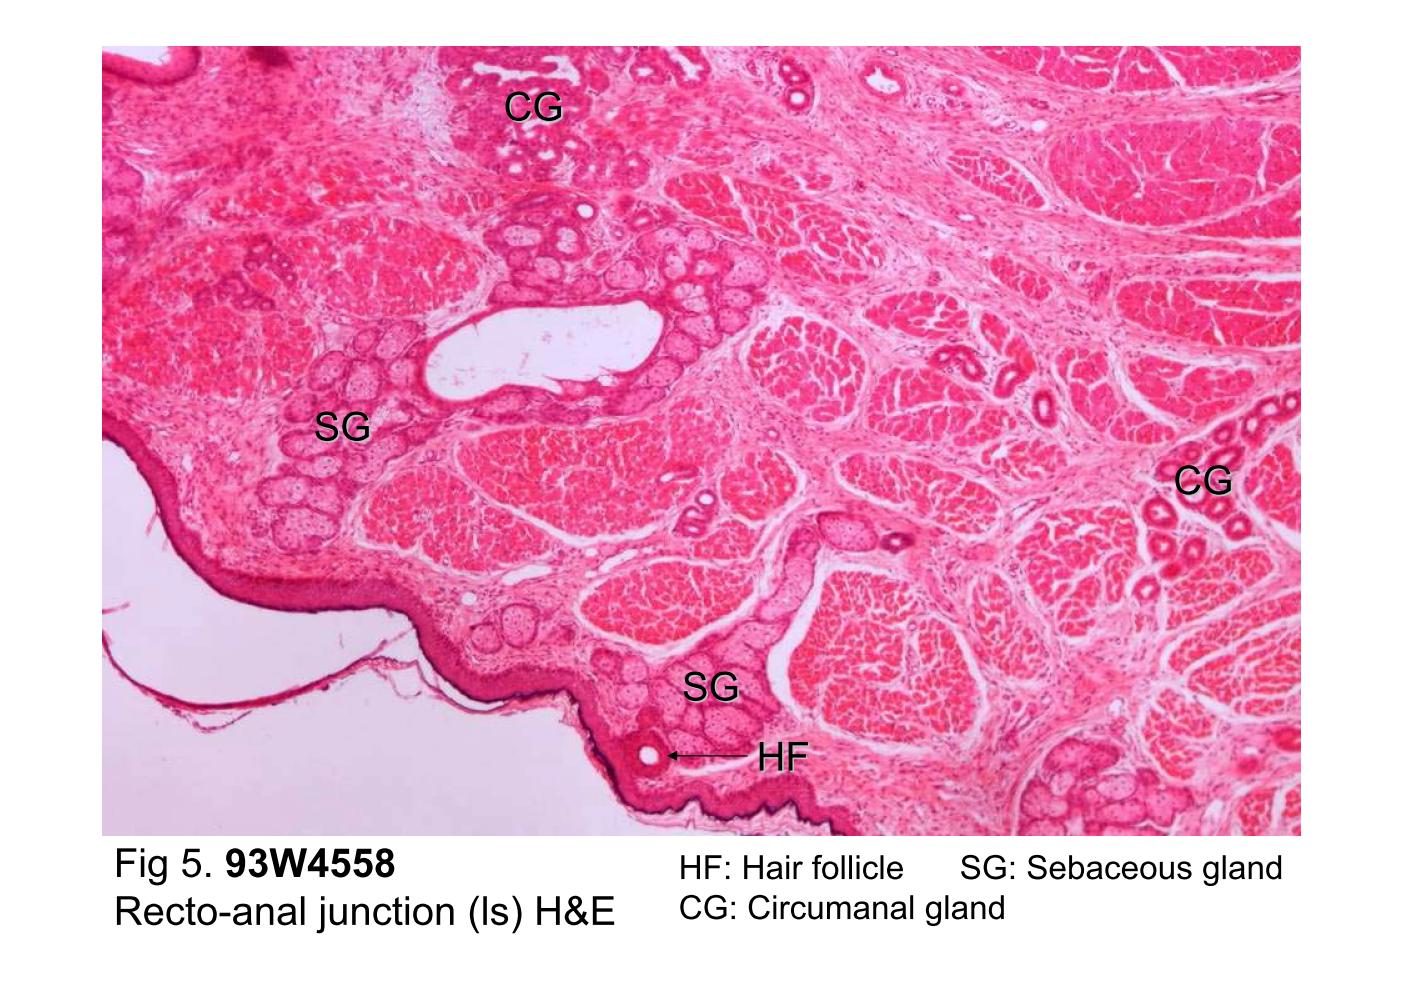 block10-2_13.jpg - Fig 5. 93W4558, Recto-anal junction (ls) H&E.The right side of this slide is the keratinized stratified squamousepithelium of skin. The dermis of the skin contains hair follicles(HF), sebaceous gland (SG) and circumanal glands (CG). Themicroscopic characteristics of the skin will be described in thenext semester.